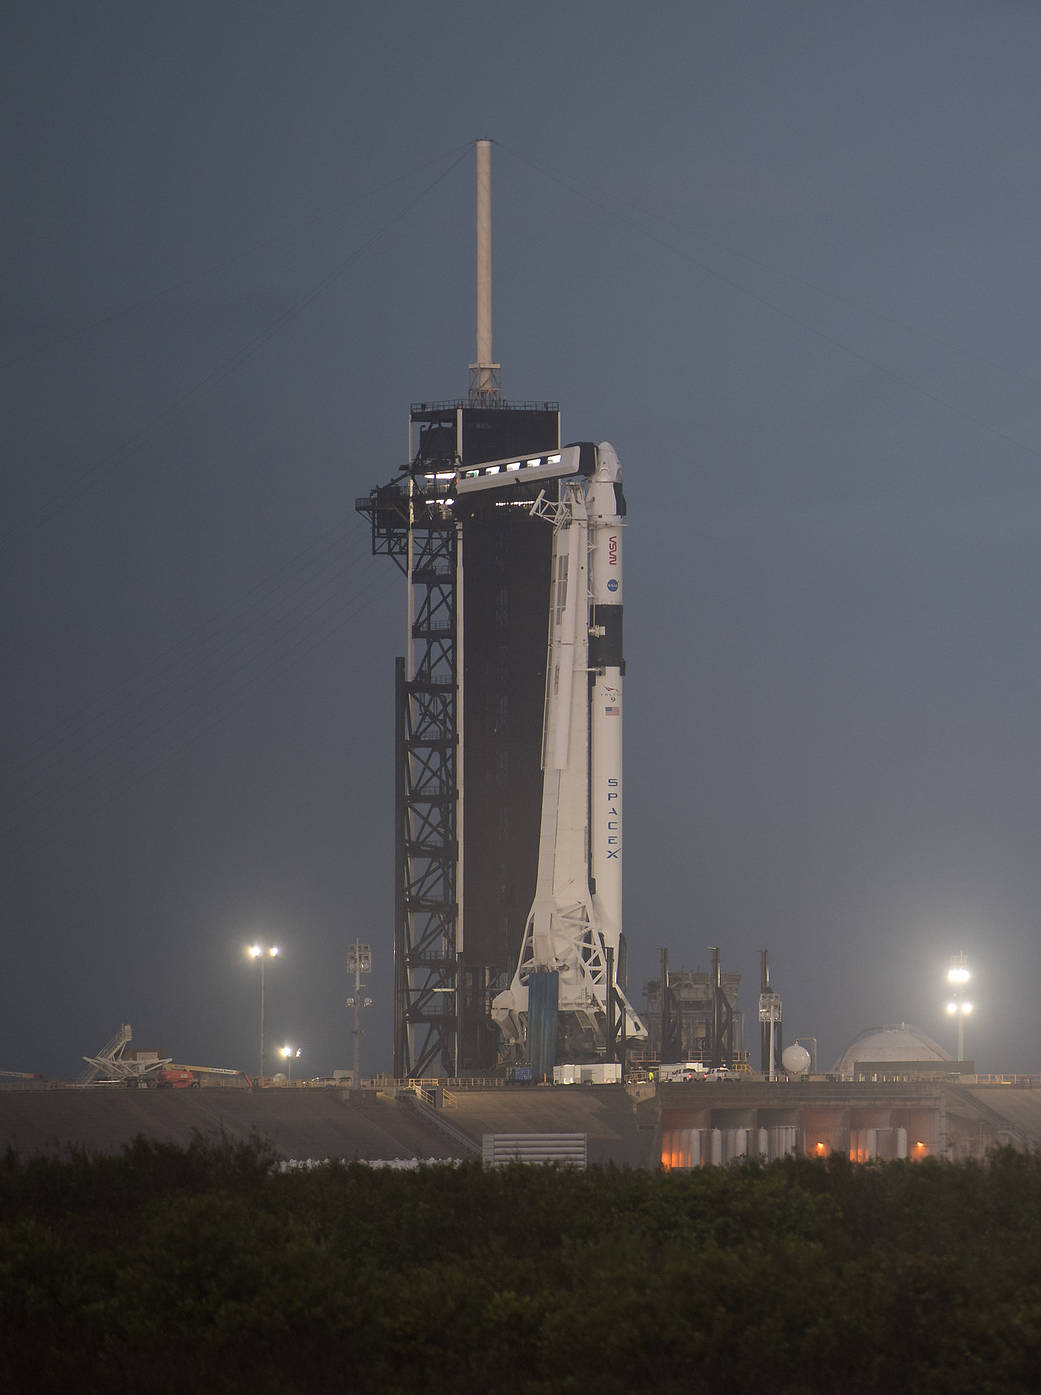 A SpaceX Falcon 9 rocket with the company's Crew Dragon spacecraft onboard is seen on the launch pad on Nov. 10, 2020.